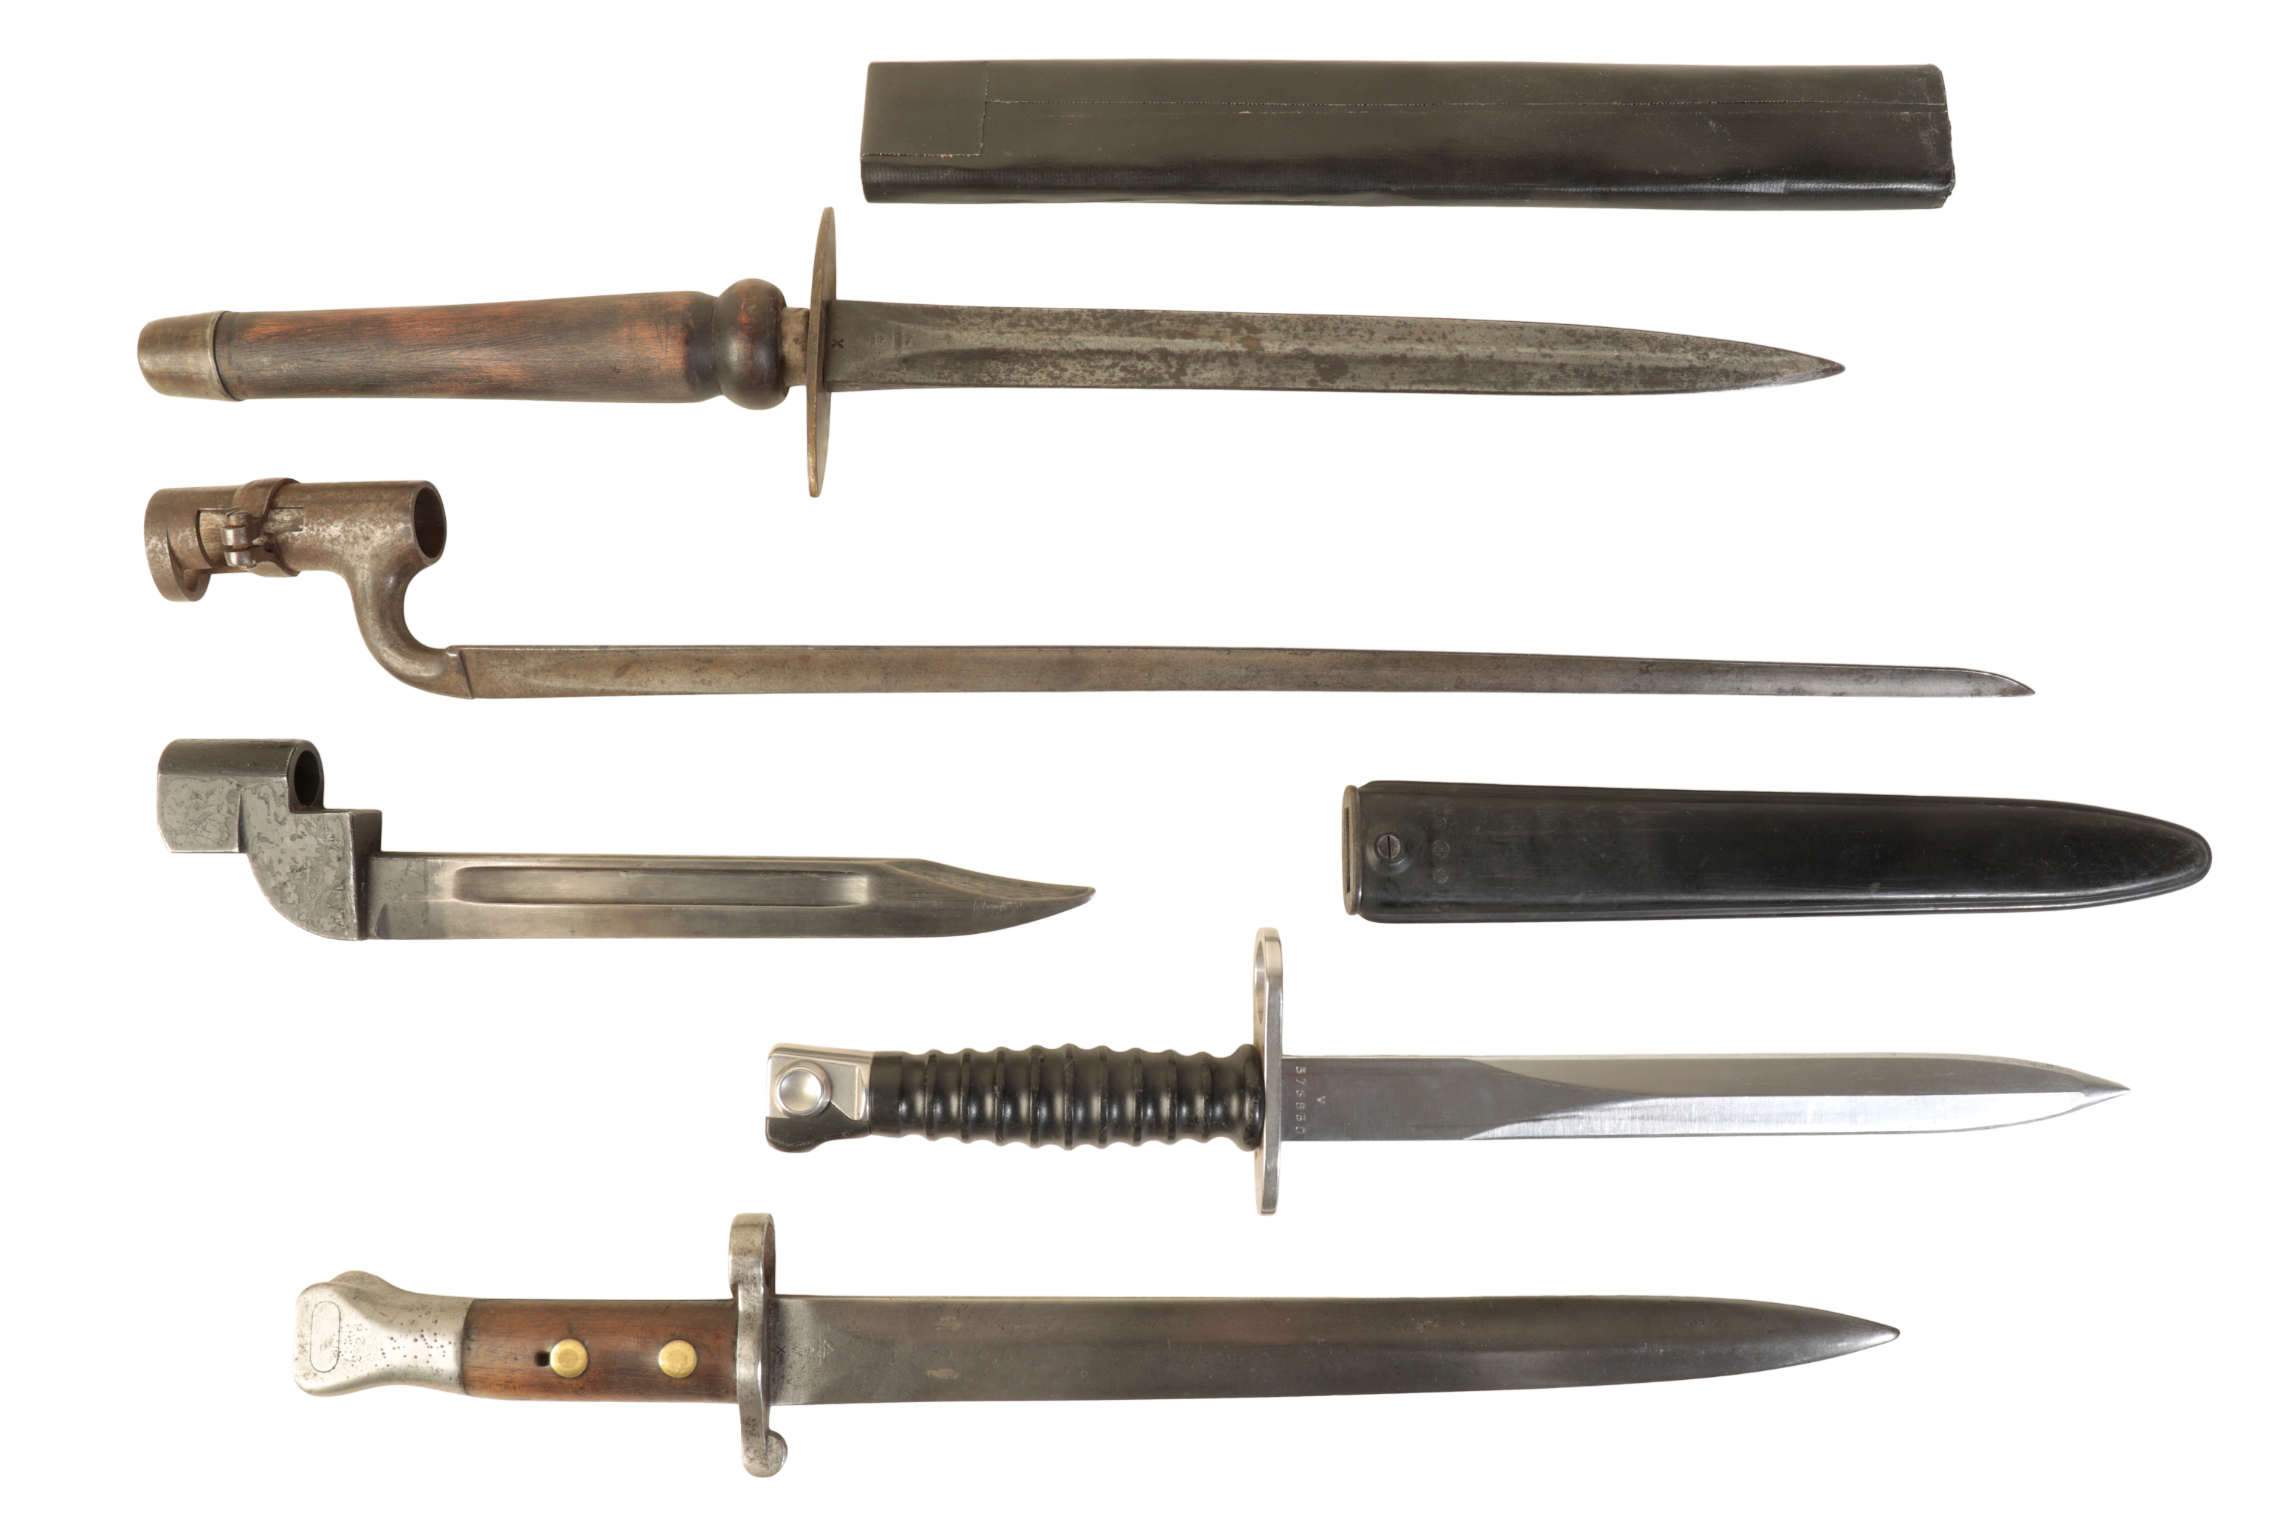 A SWISS BAYONET Lee Metford without